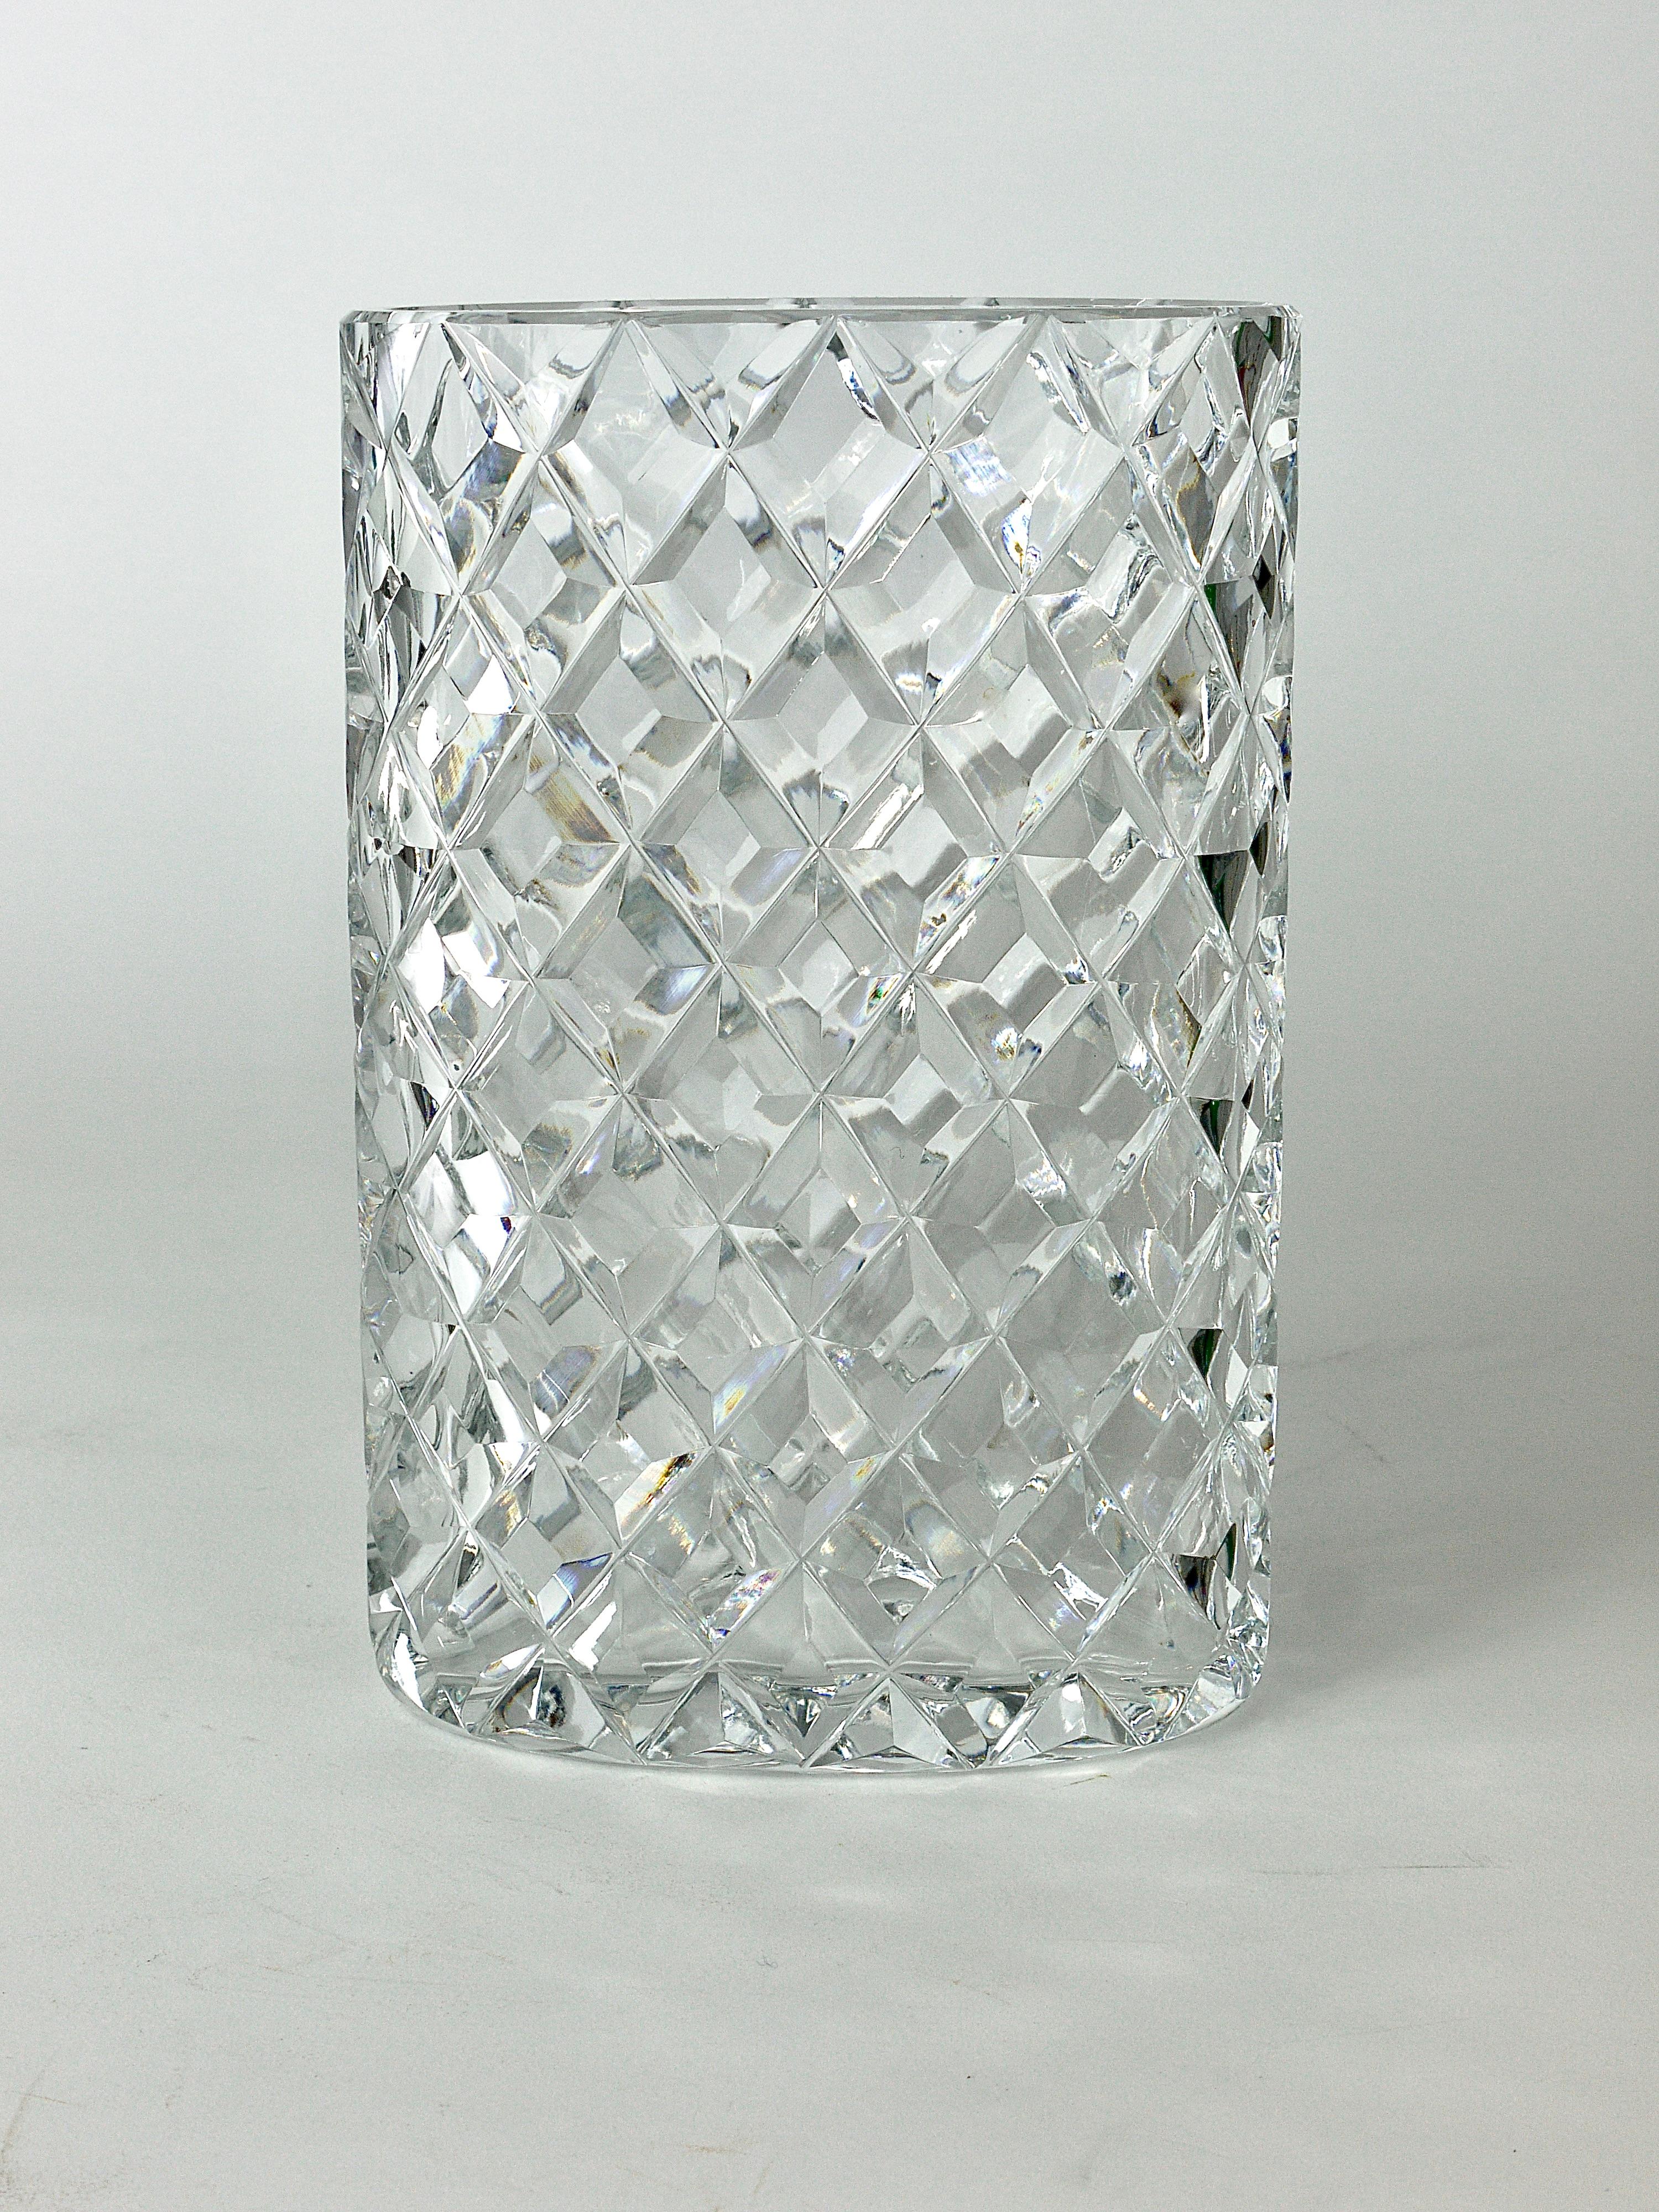 Sparkling Facetted Crystal Glass Vase by Claus Josef Riedel, Austria, 1970s For Sale 6